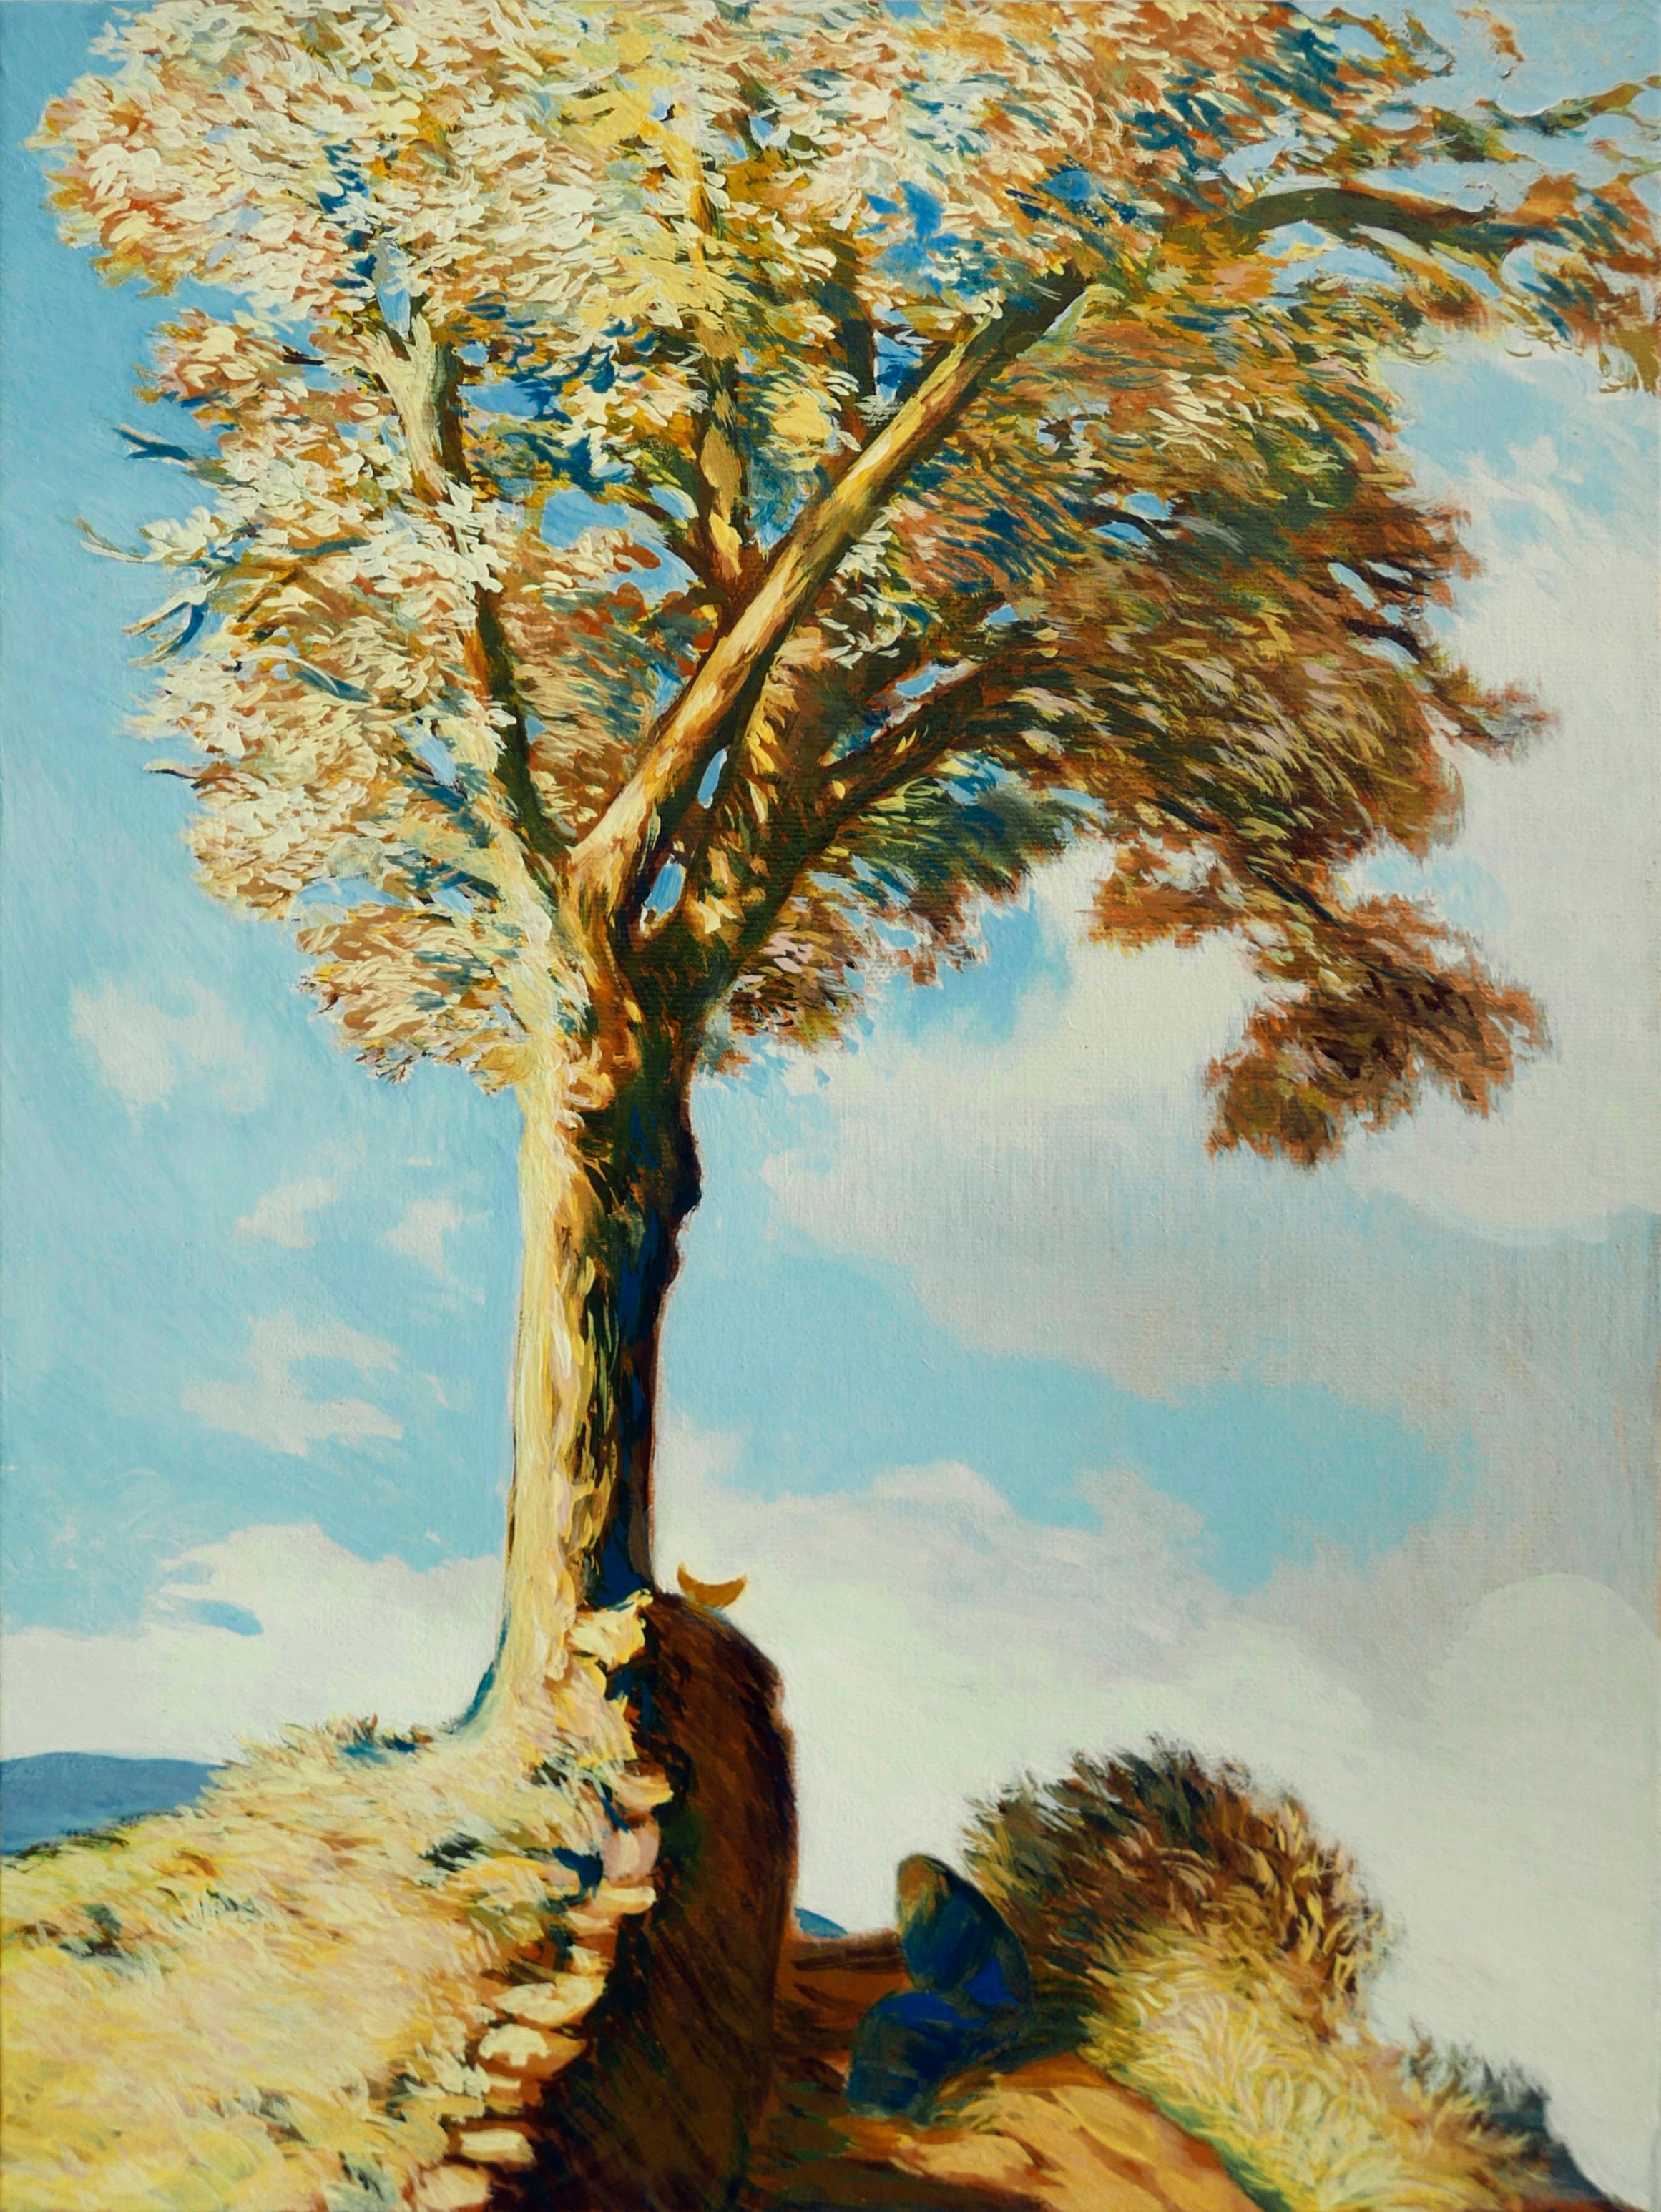 Petya Deneva Landscape Painting - The Tree Of Knowledge - Oil Painting Colors White Yellow Orange Blue Brown Green